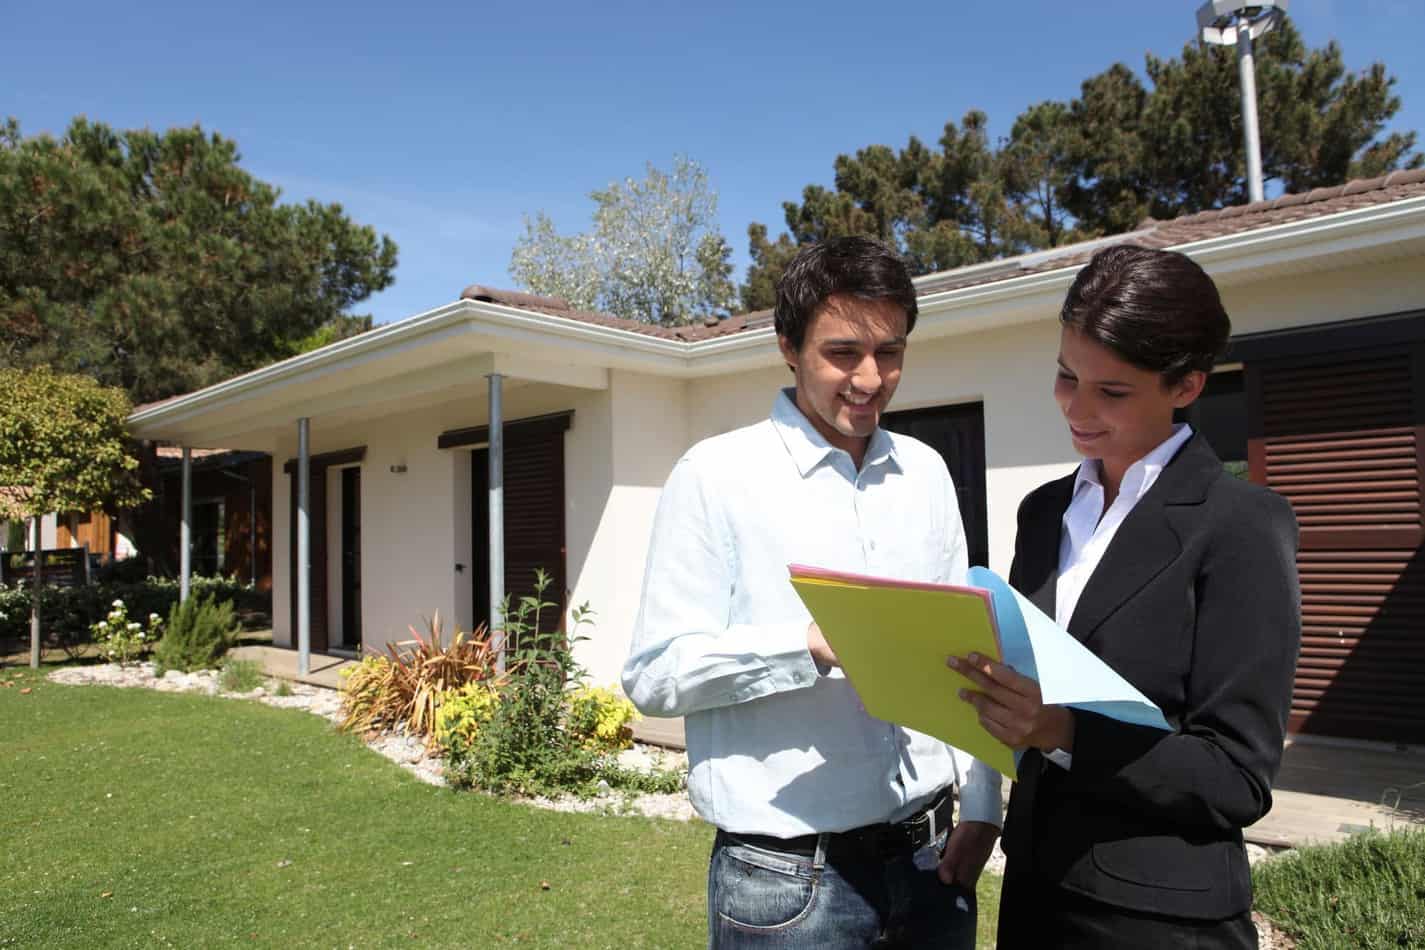 How to become a real estate appraiser